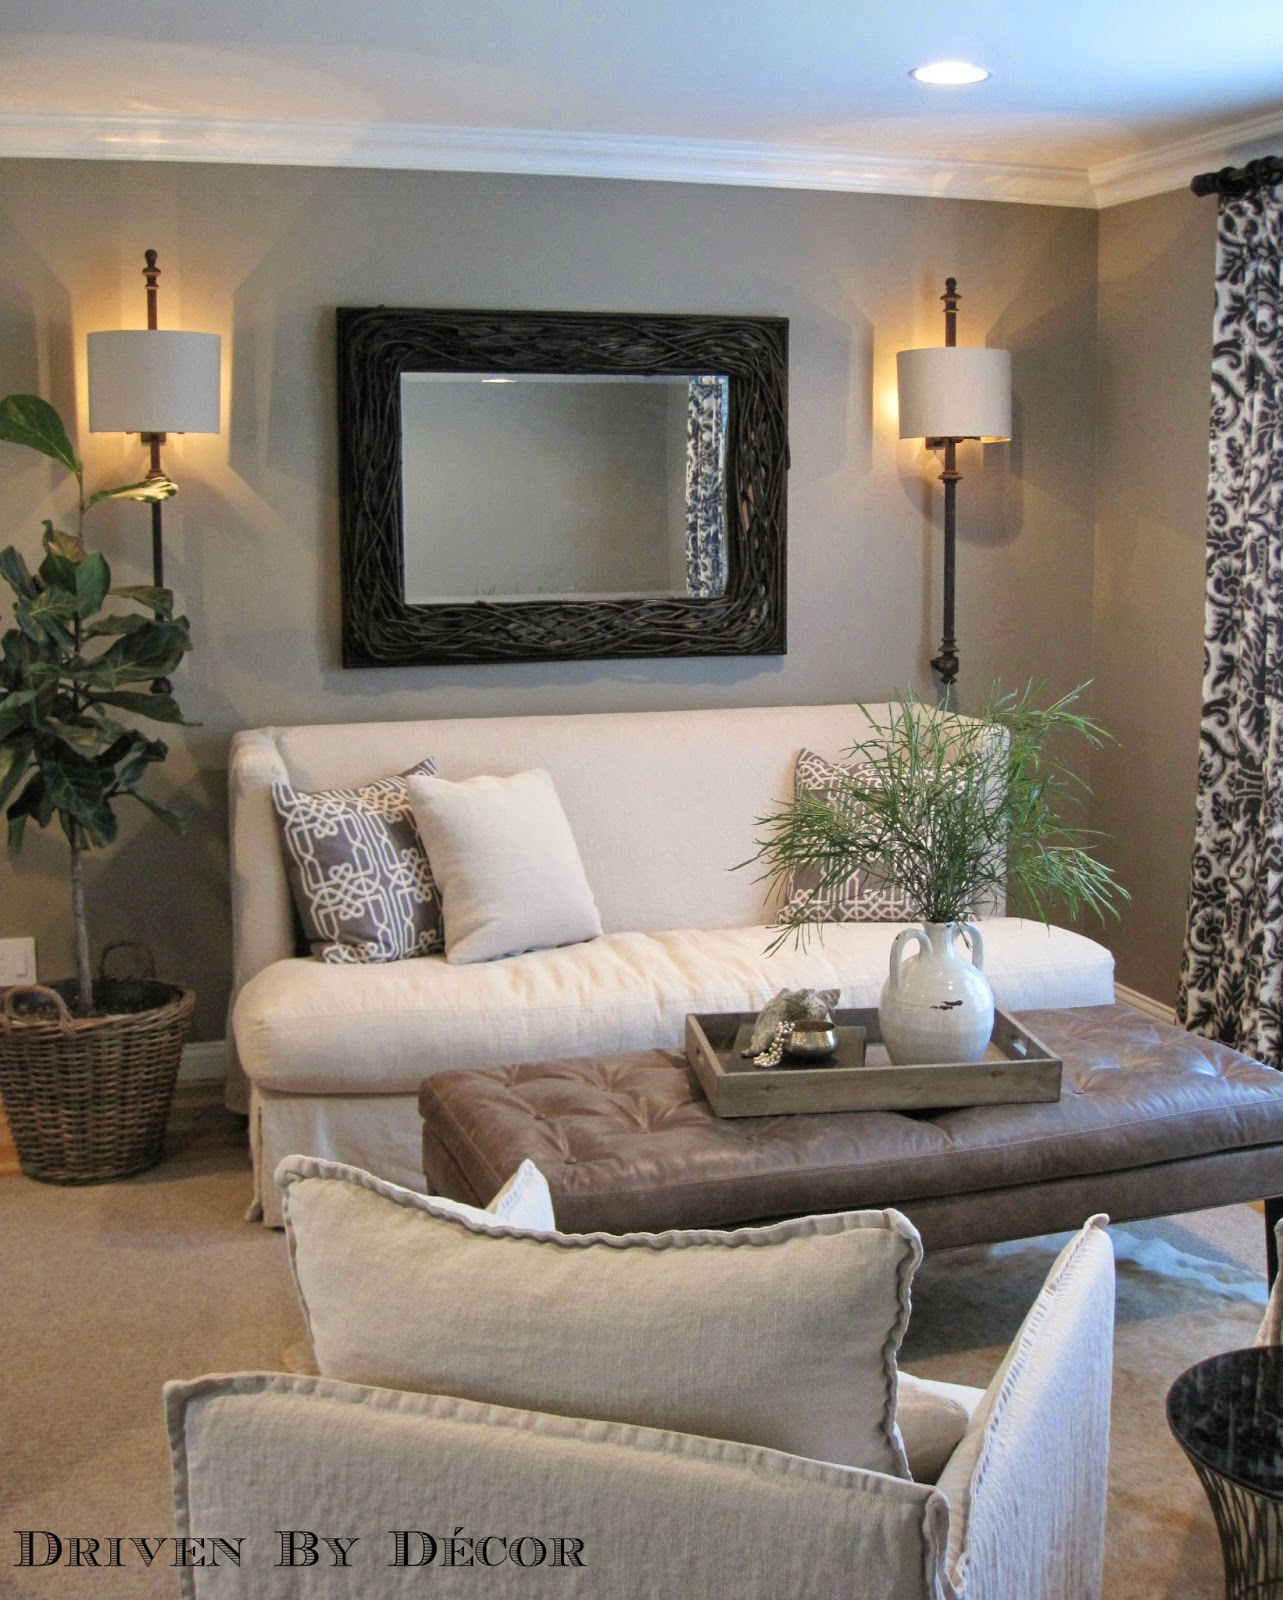 House Tour: Living Room | Driven by Decor